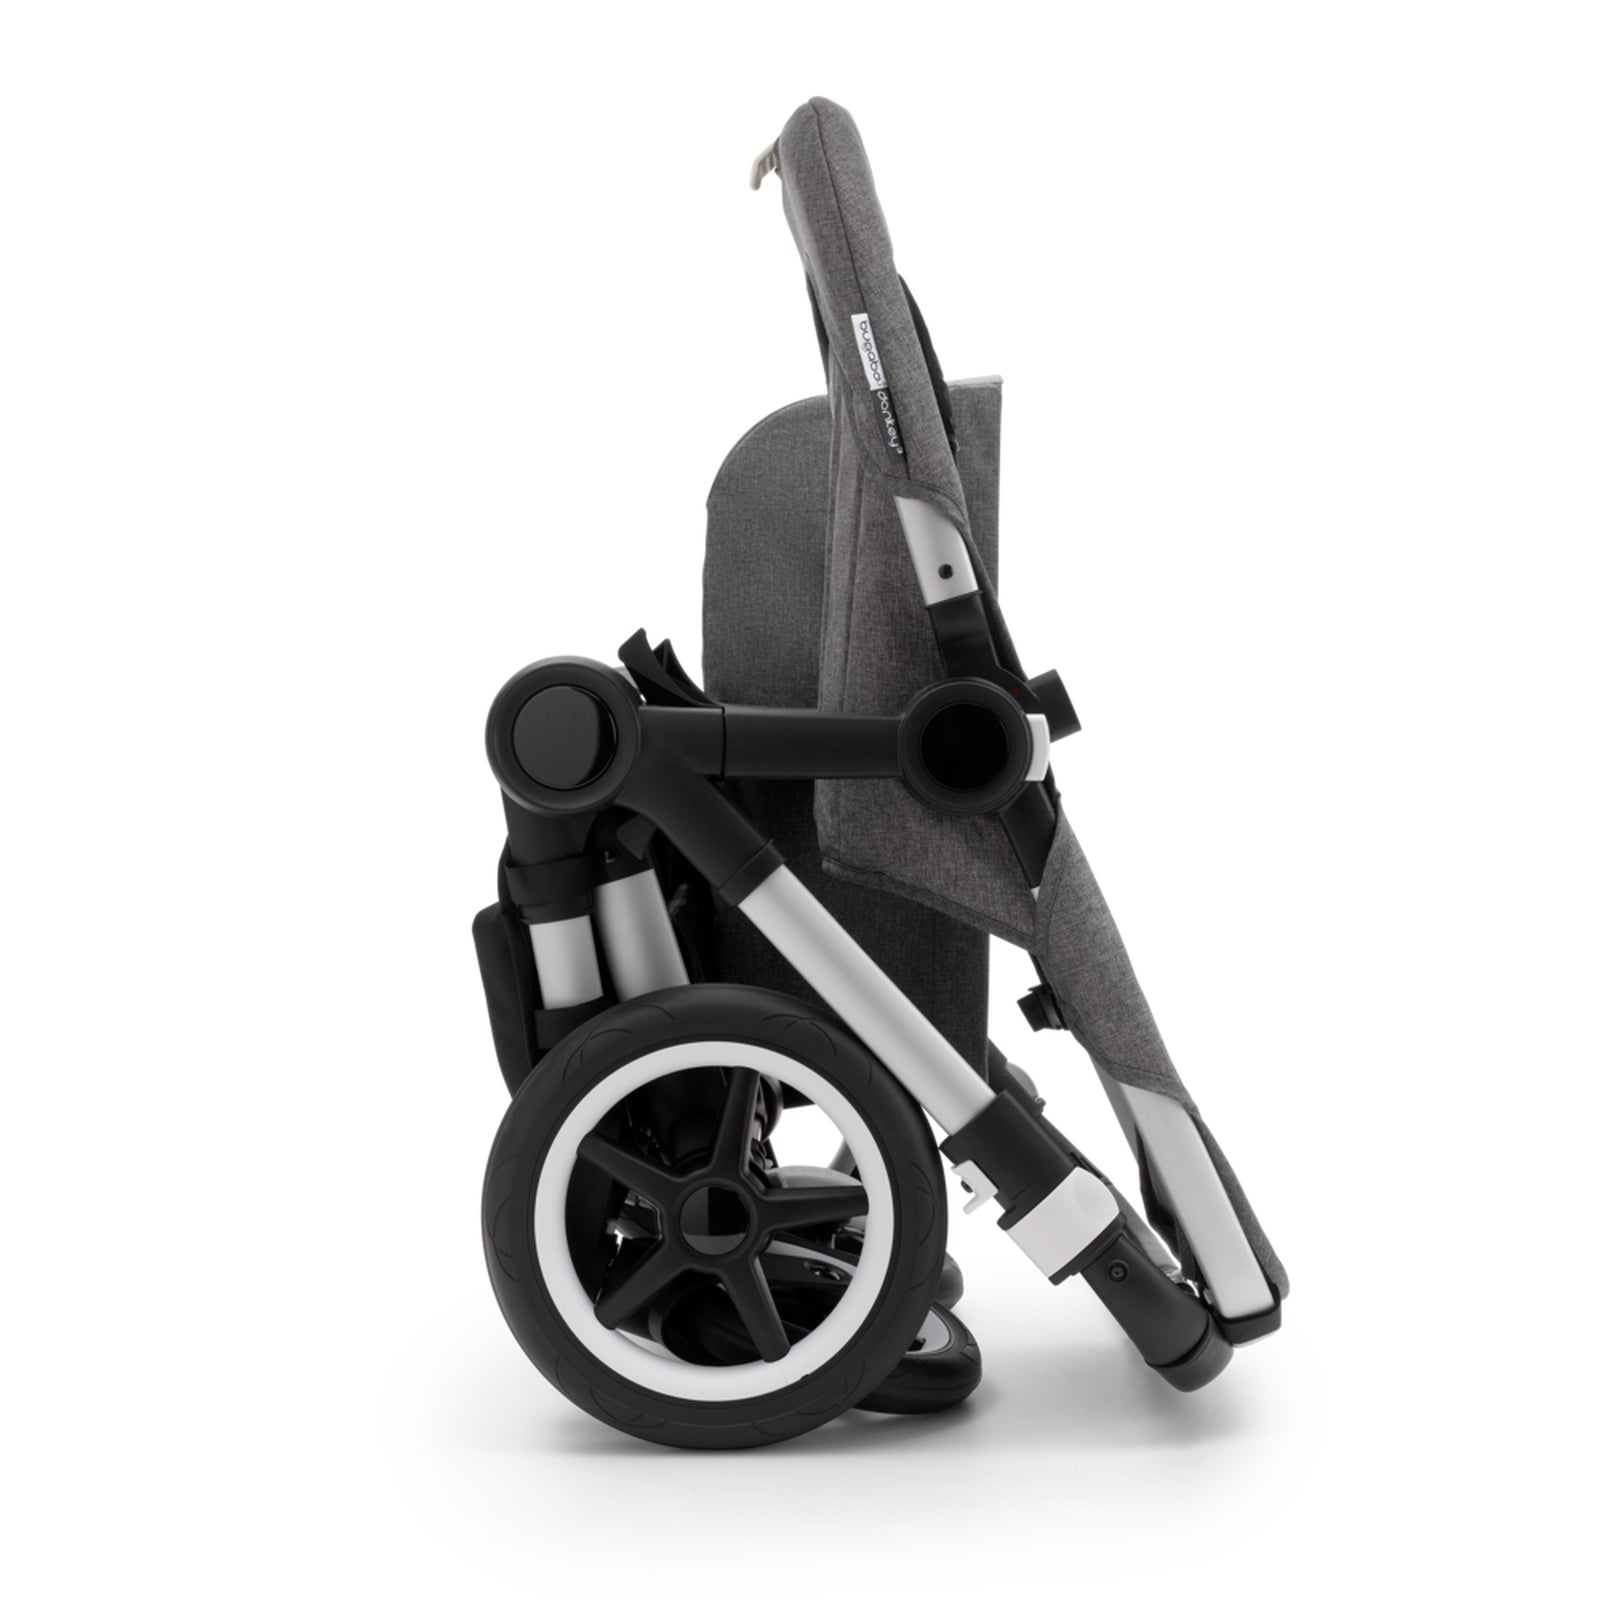 Bugaboo Donkey 3 Mono Seat and Carrycot Pushchair - Mineral Washed Black